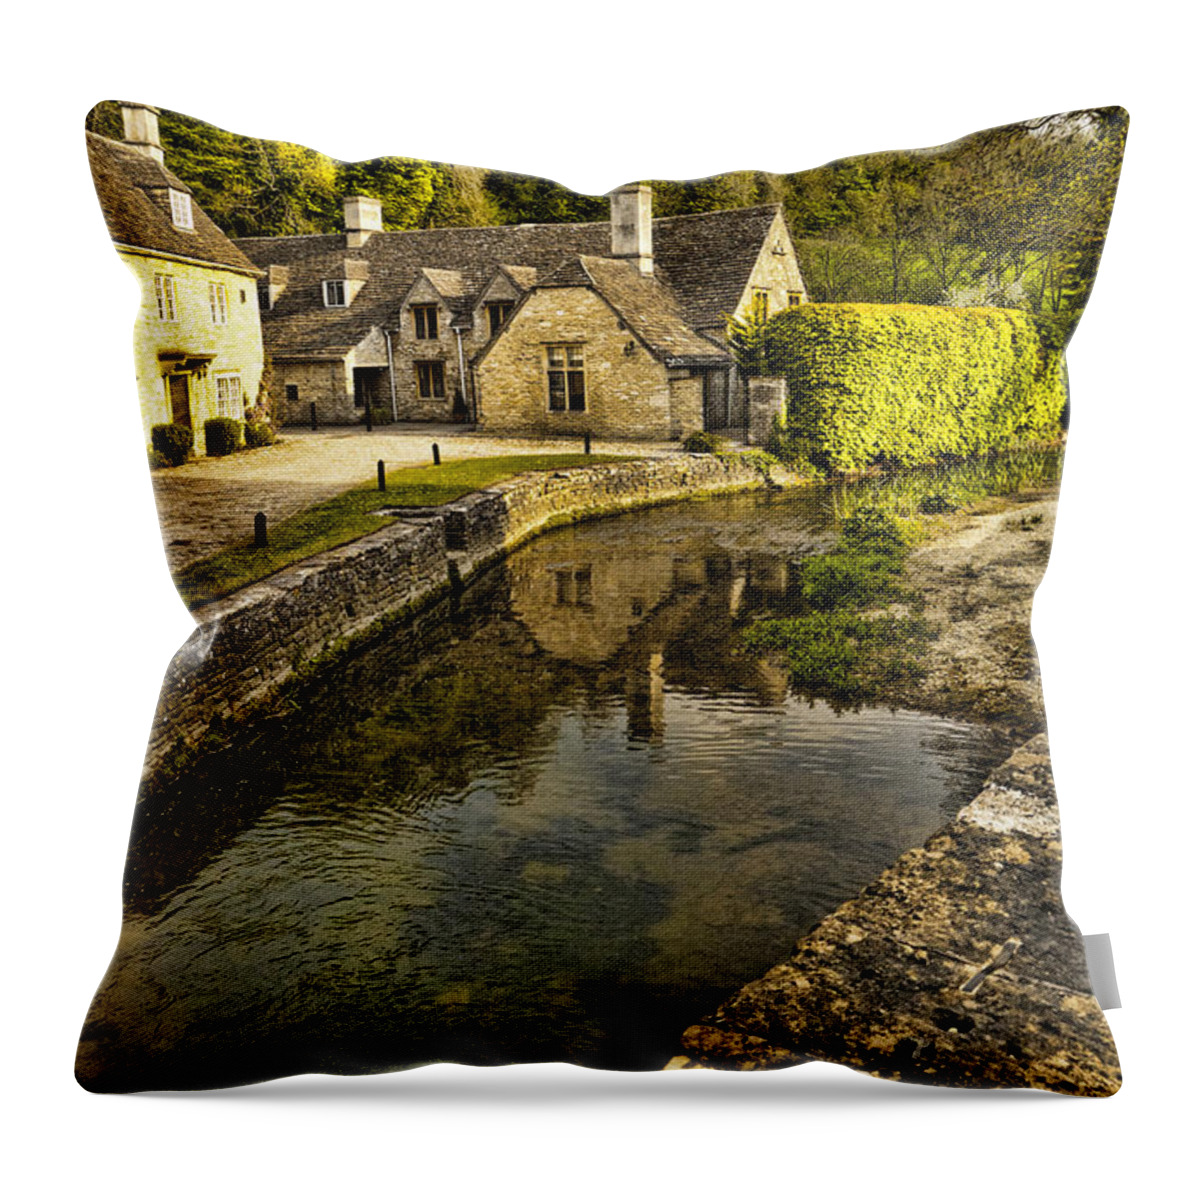 Castle Combe Throw Pillow featuring the photograph Castle Combe Bridgeside by Jon Berghoff